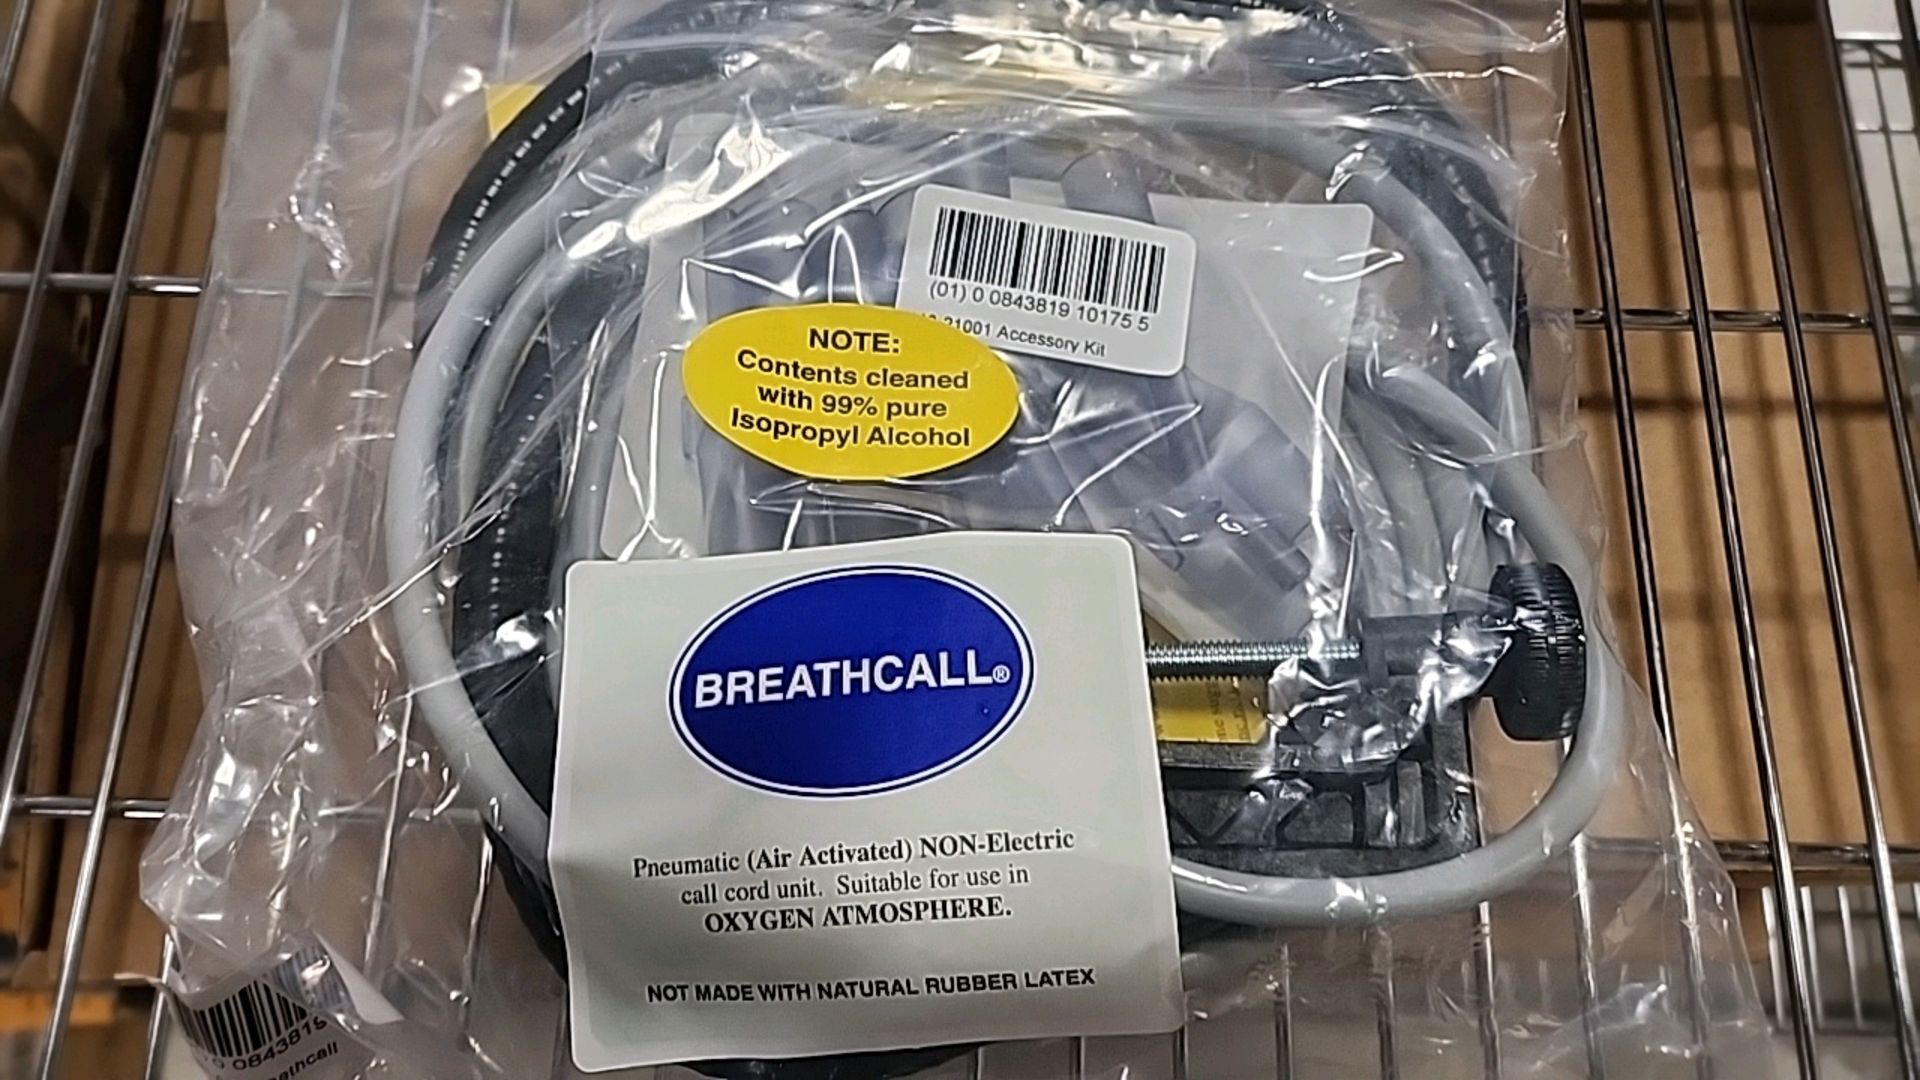 BREATHCALL MODEL 11001-09 PNEUMATIC (AIR ACTIVATED) NON-ELECTRIC CALL CORD UNIT. , QTY(13) UNITS - Image 4 of 4